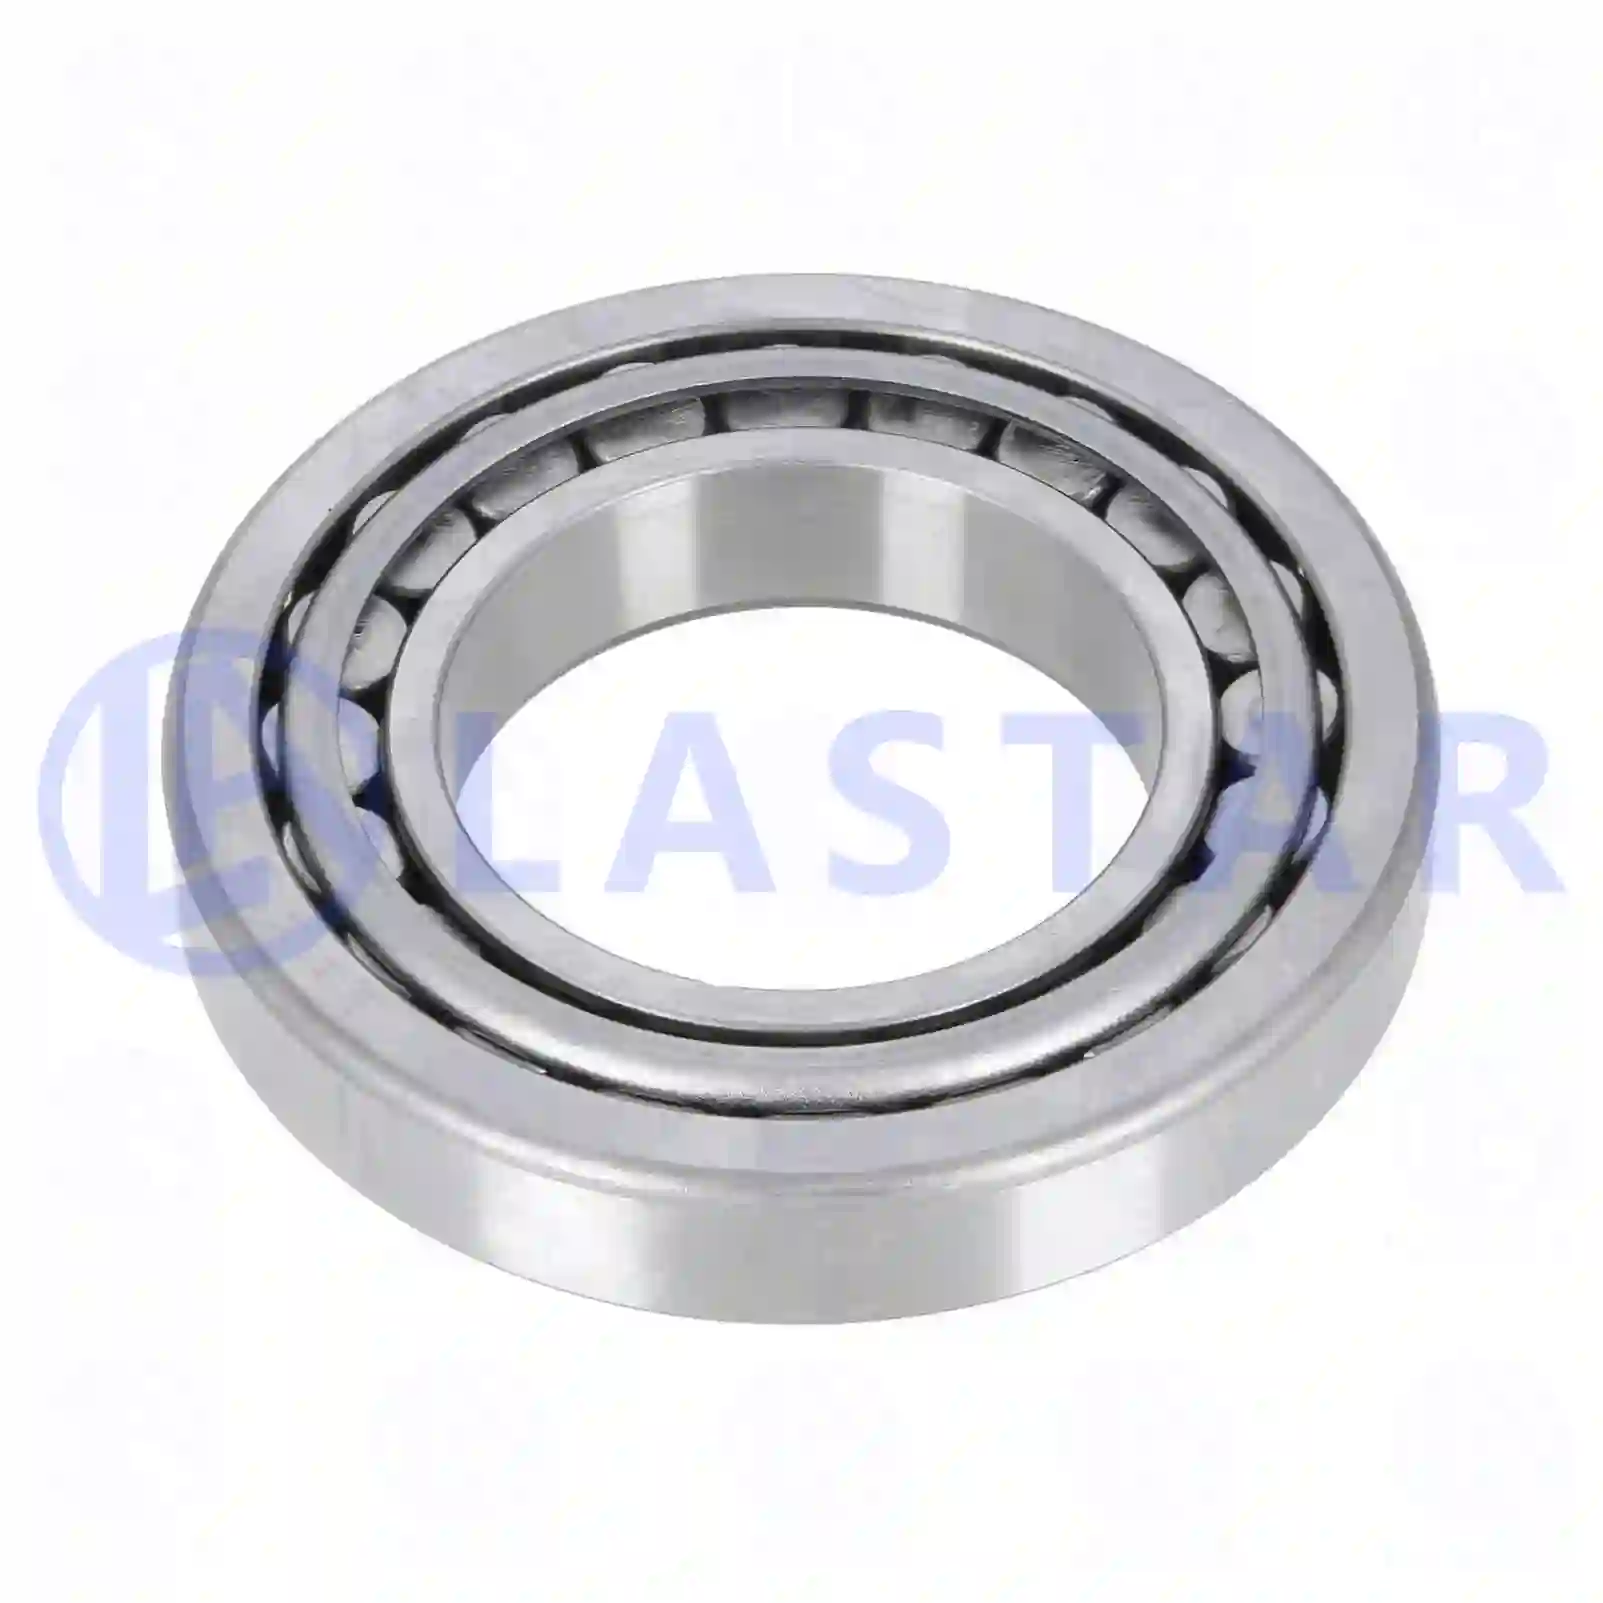 Bearings Tapered roller bearing, la no: 77725310 ,  oem no:01109968, 26800050, 000720030217, 0109811501, 6691129000, 0959130217, 7400018459, 8064030217, 1109968, 174631, 1746780, 174717, 18459, 77545, 6691129000, 1652119, 18459 Lastar Spare Part | Truck Spare Parts, Auotomotive Spare Parts